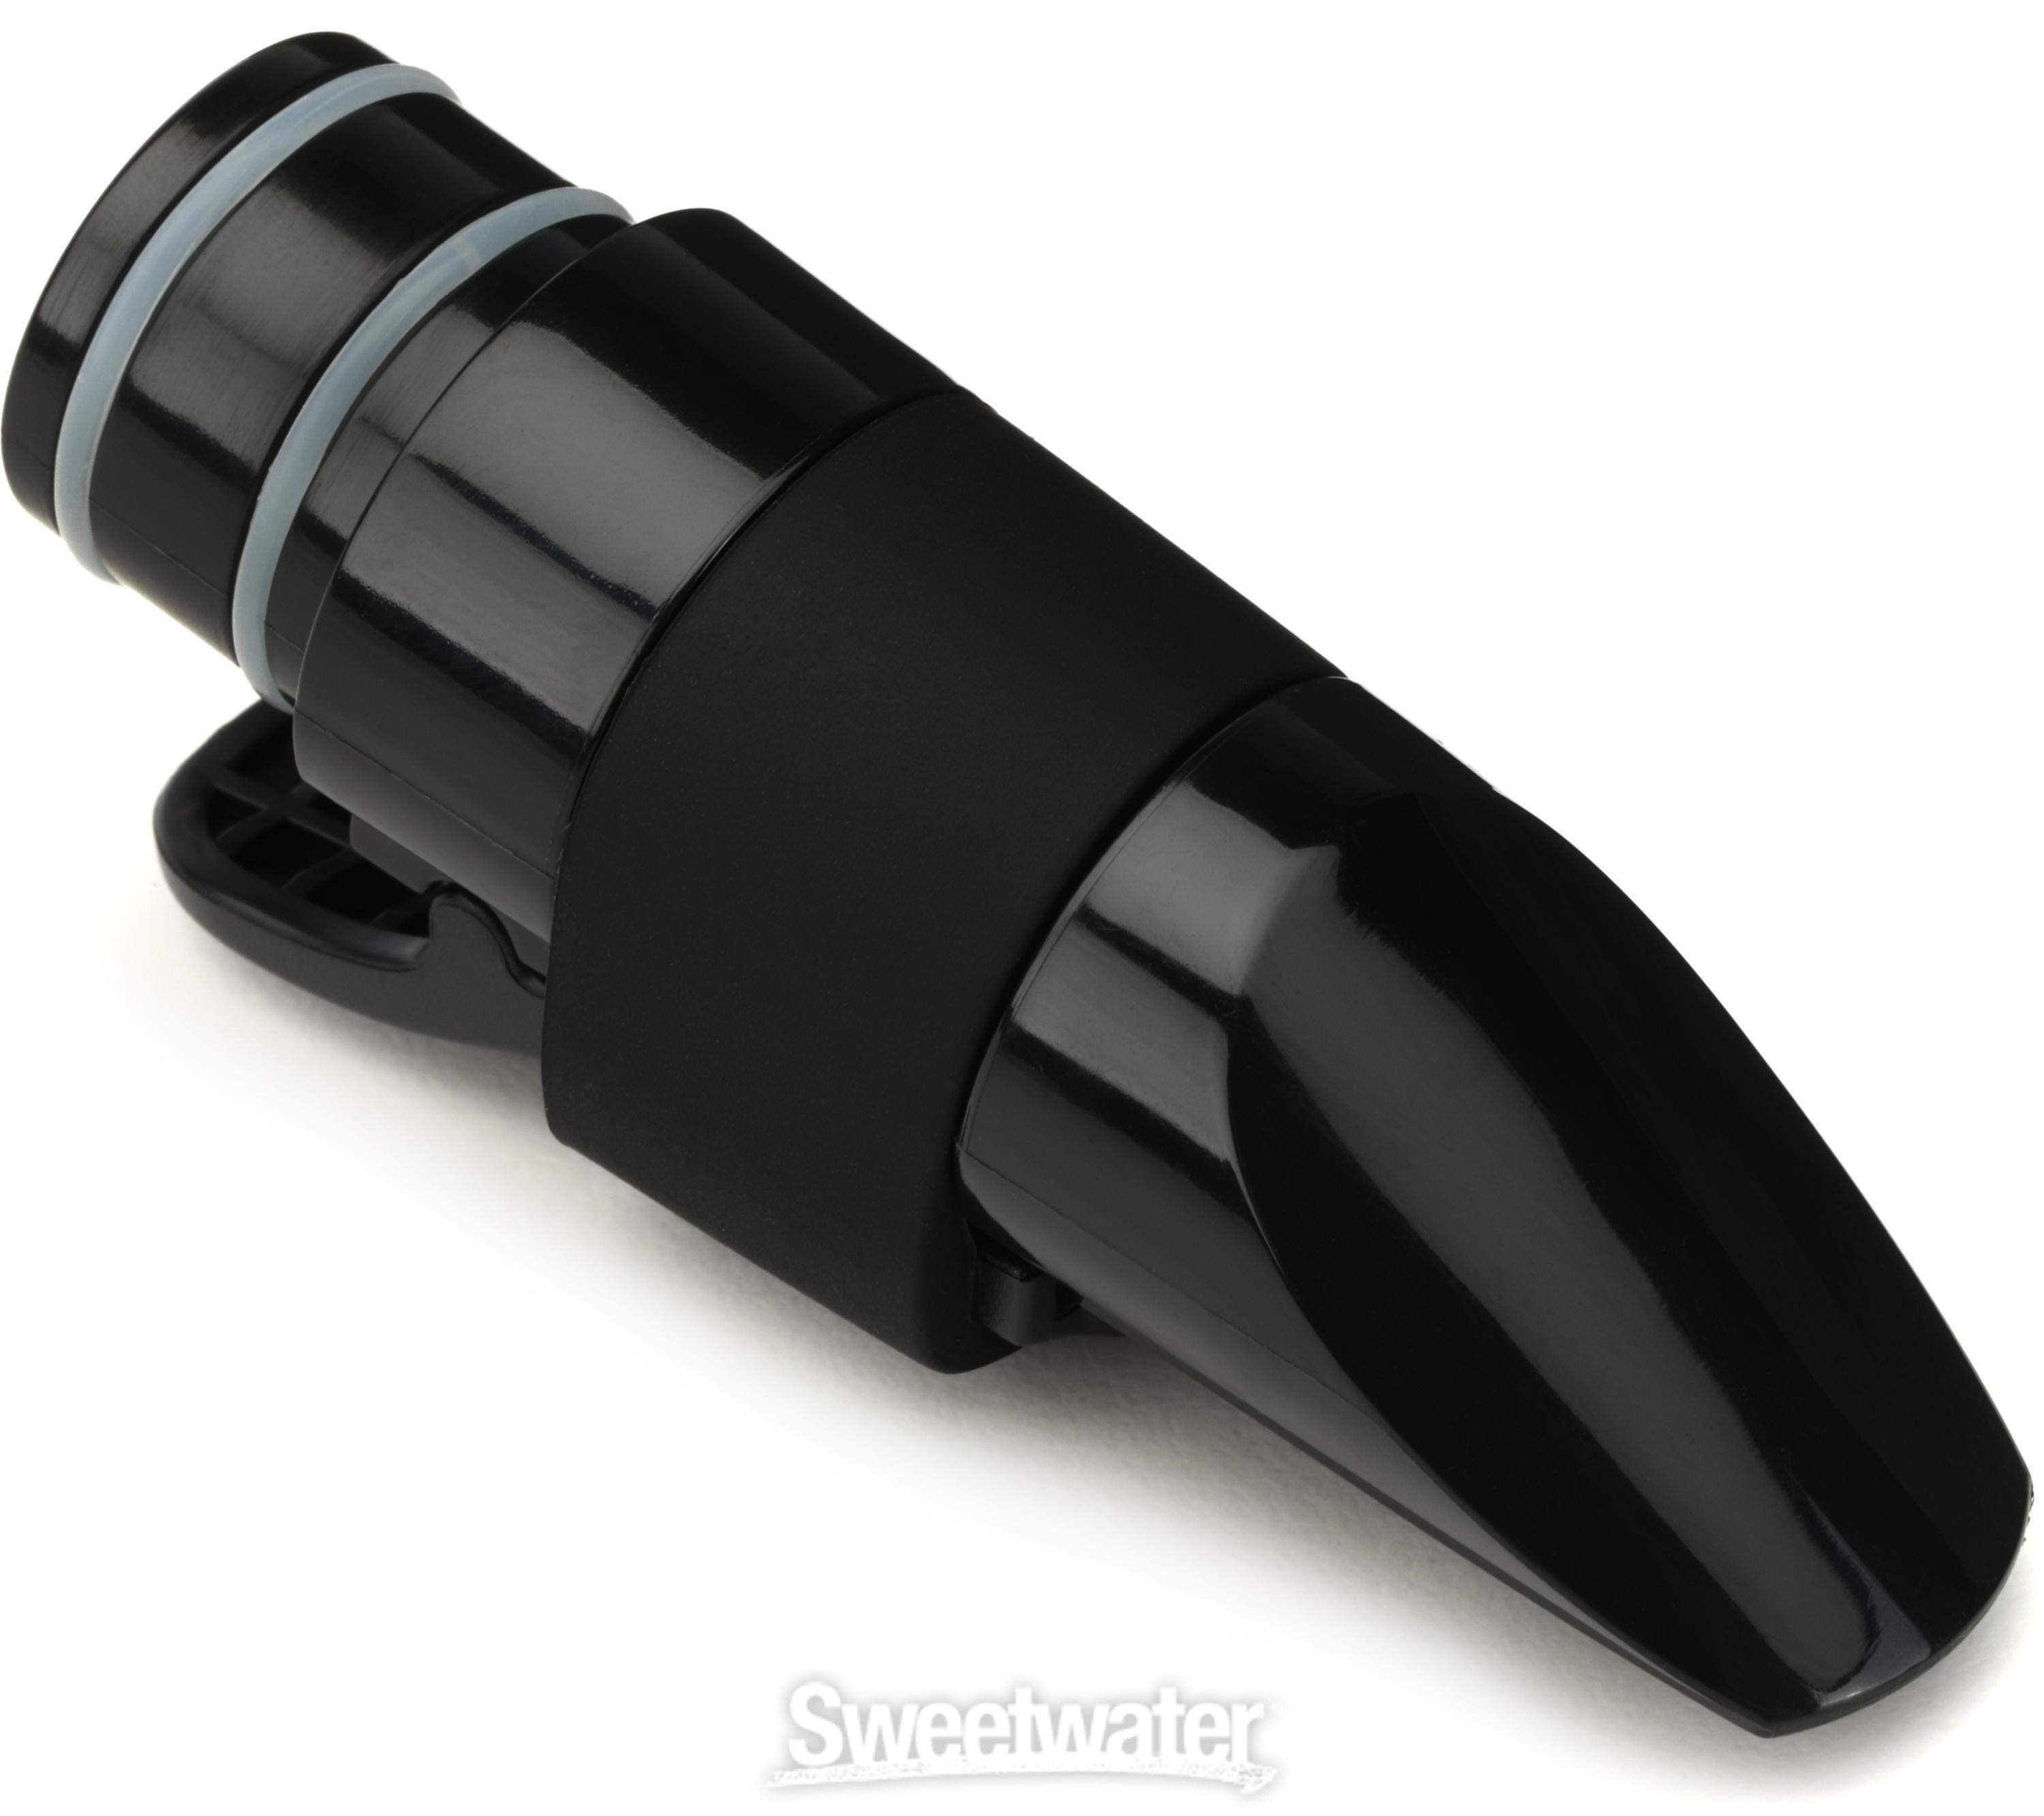 Nuvo N160MPBK Dood/Clarinéo Mouthpiece - Black | Sweetwater